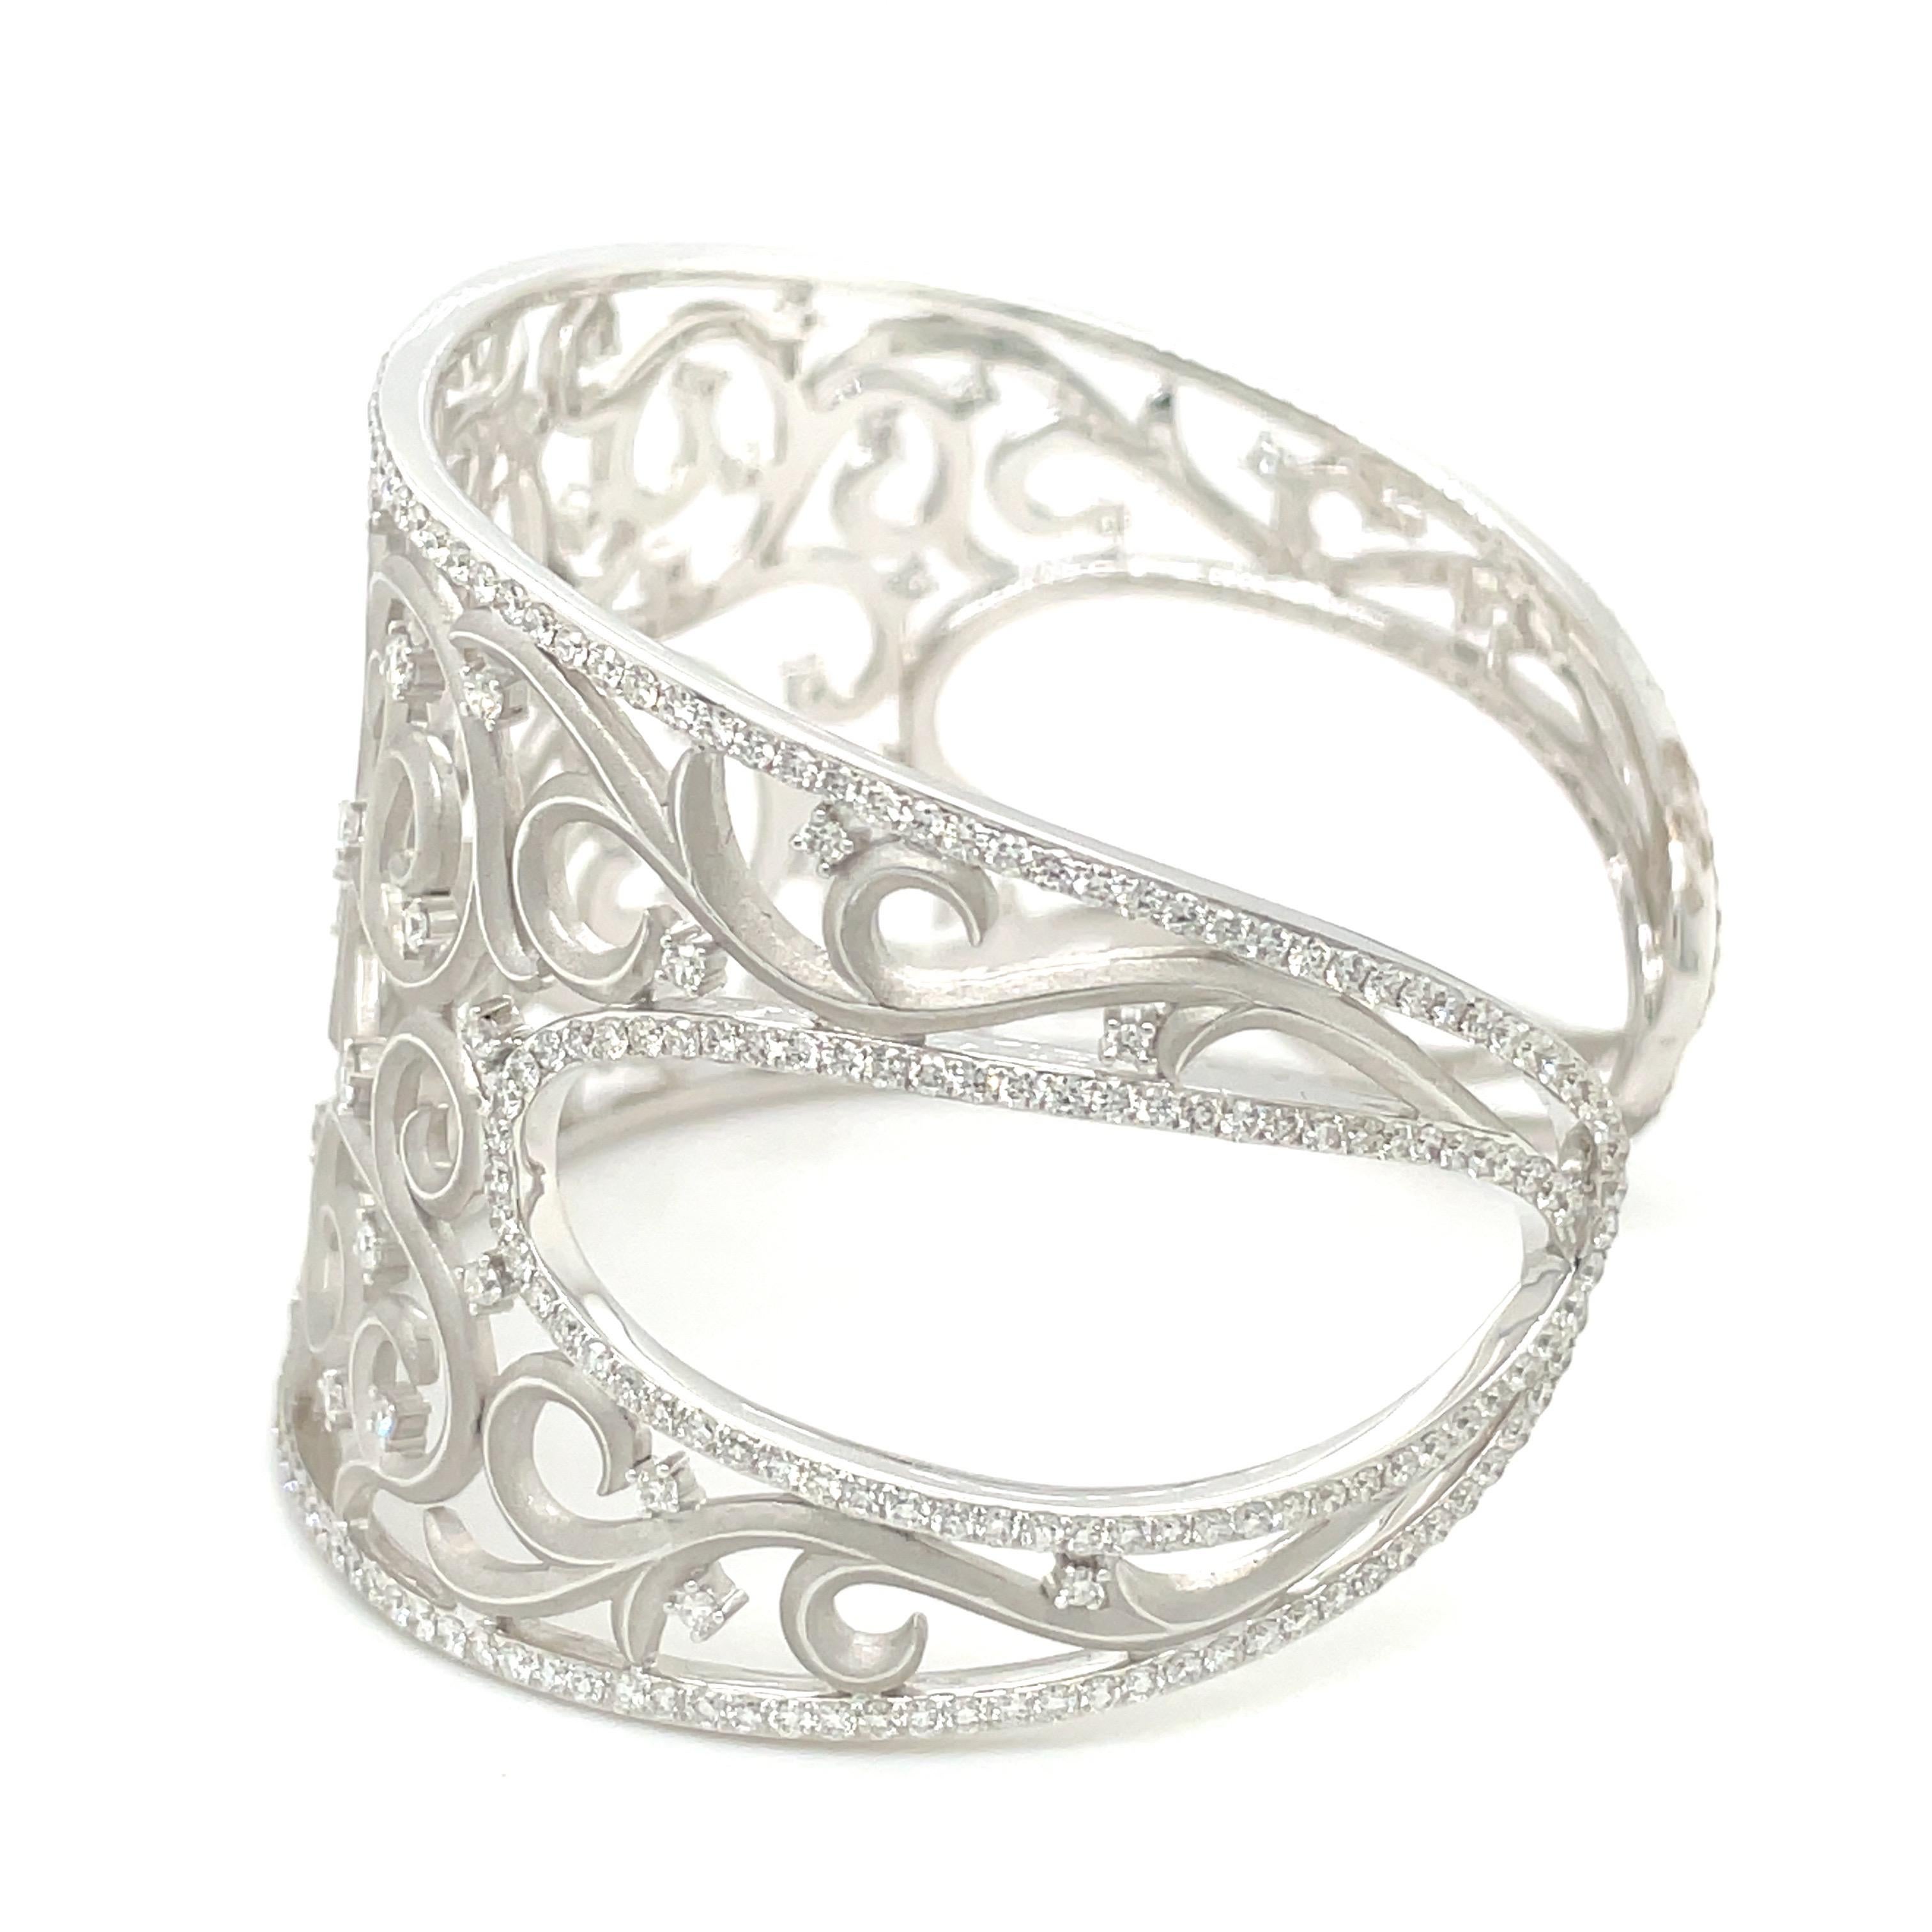 Cellini 18kt White Gold and Diamond 4.90Ct. Lace Cuff Bracelet For Sale 5